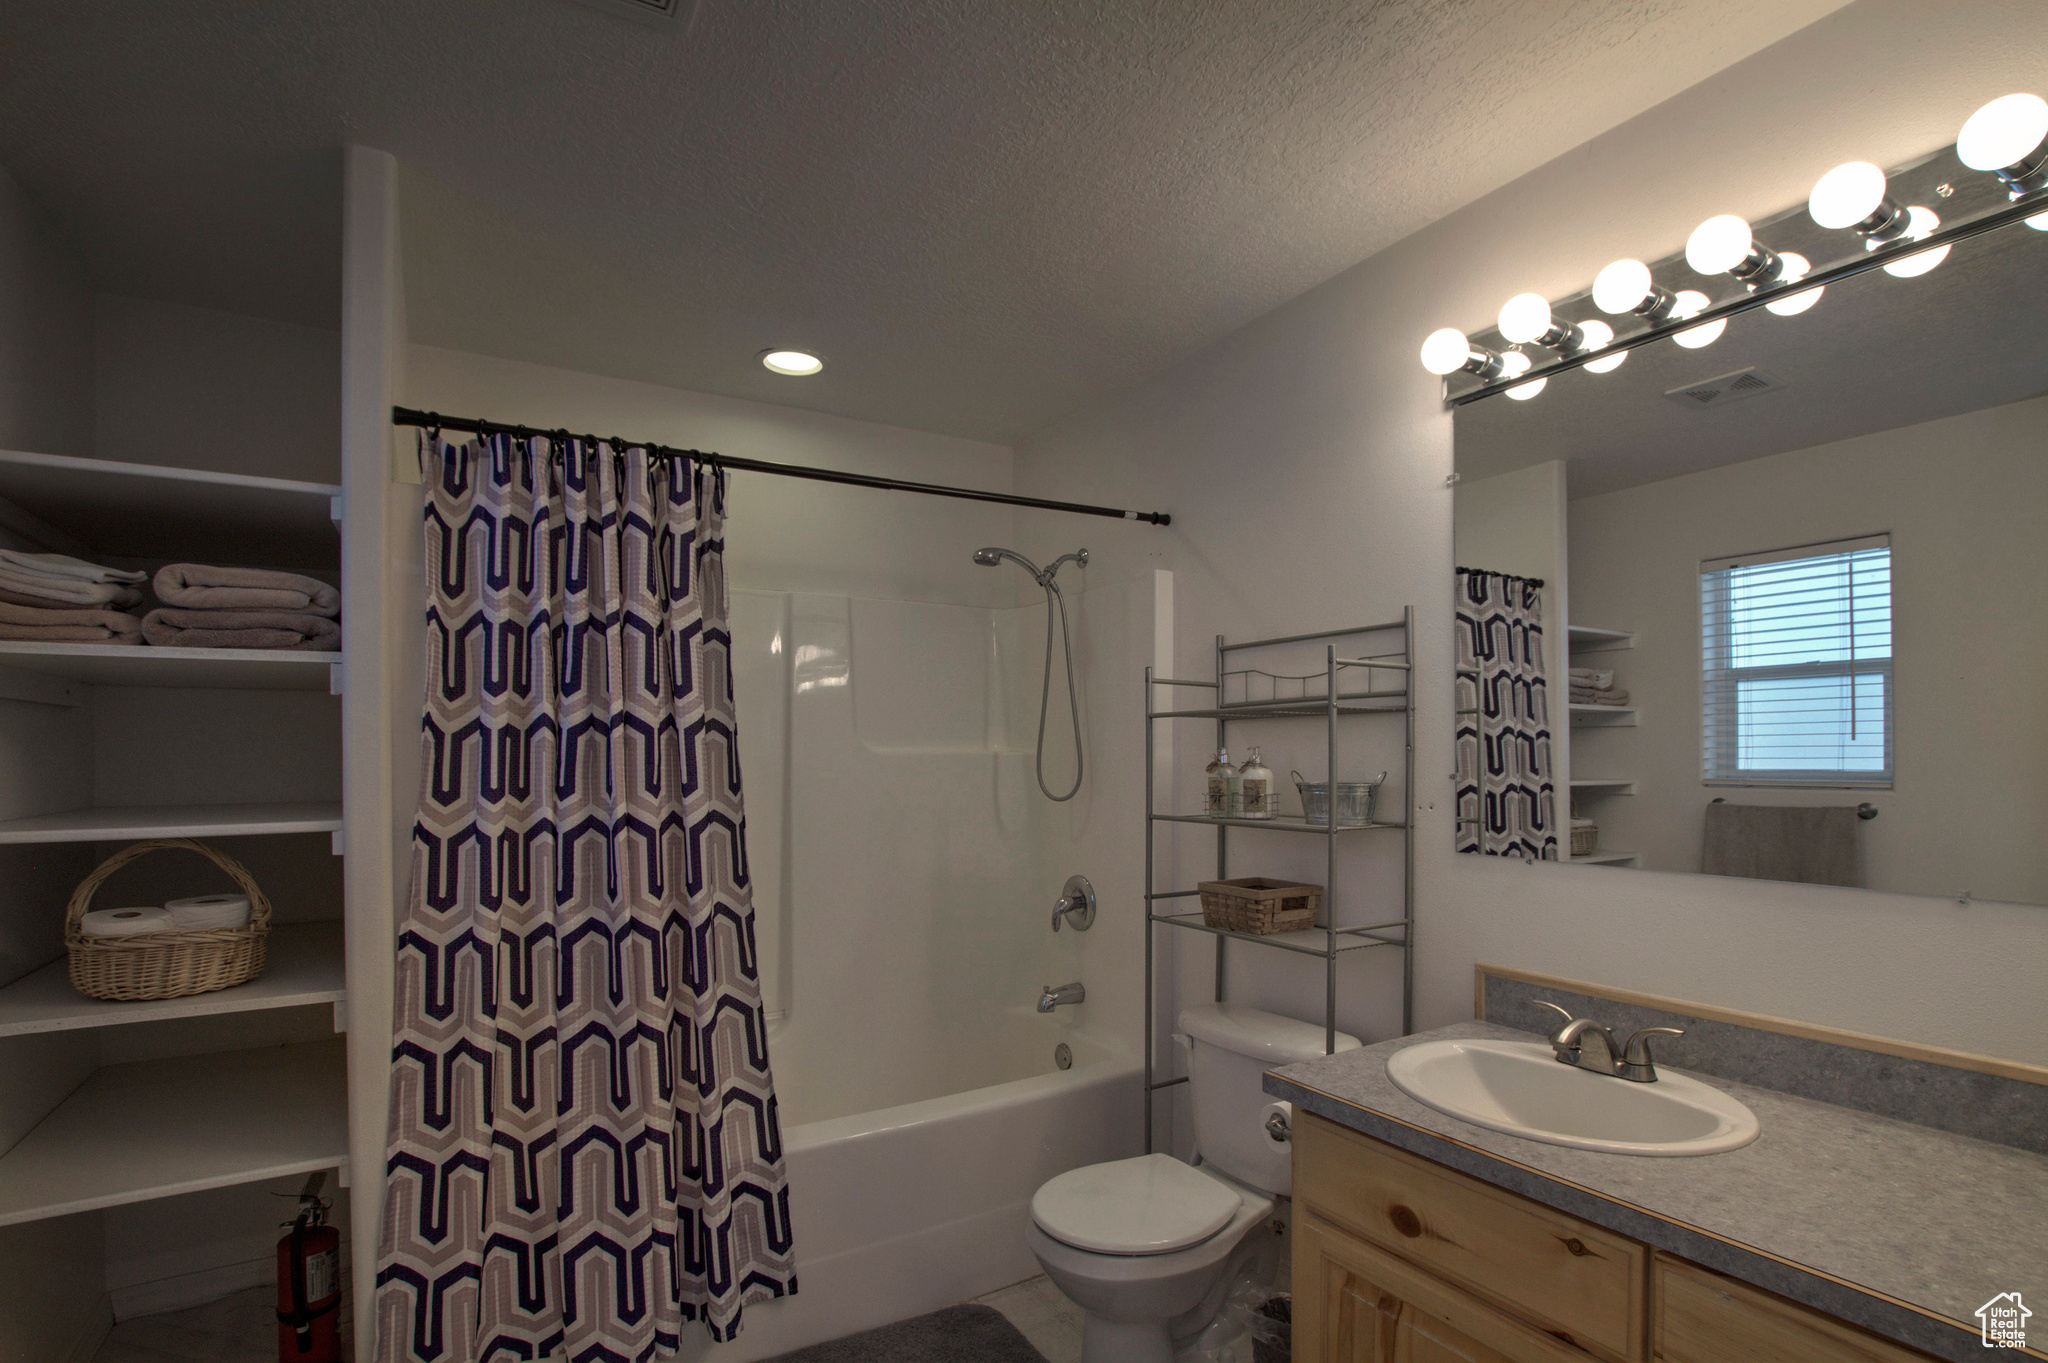 Full bathroom featuring a textured ceiling, shower / tub combo with curtain, tile flooring, vanity, and toilet